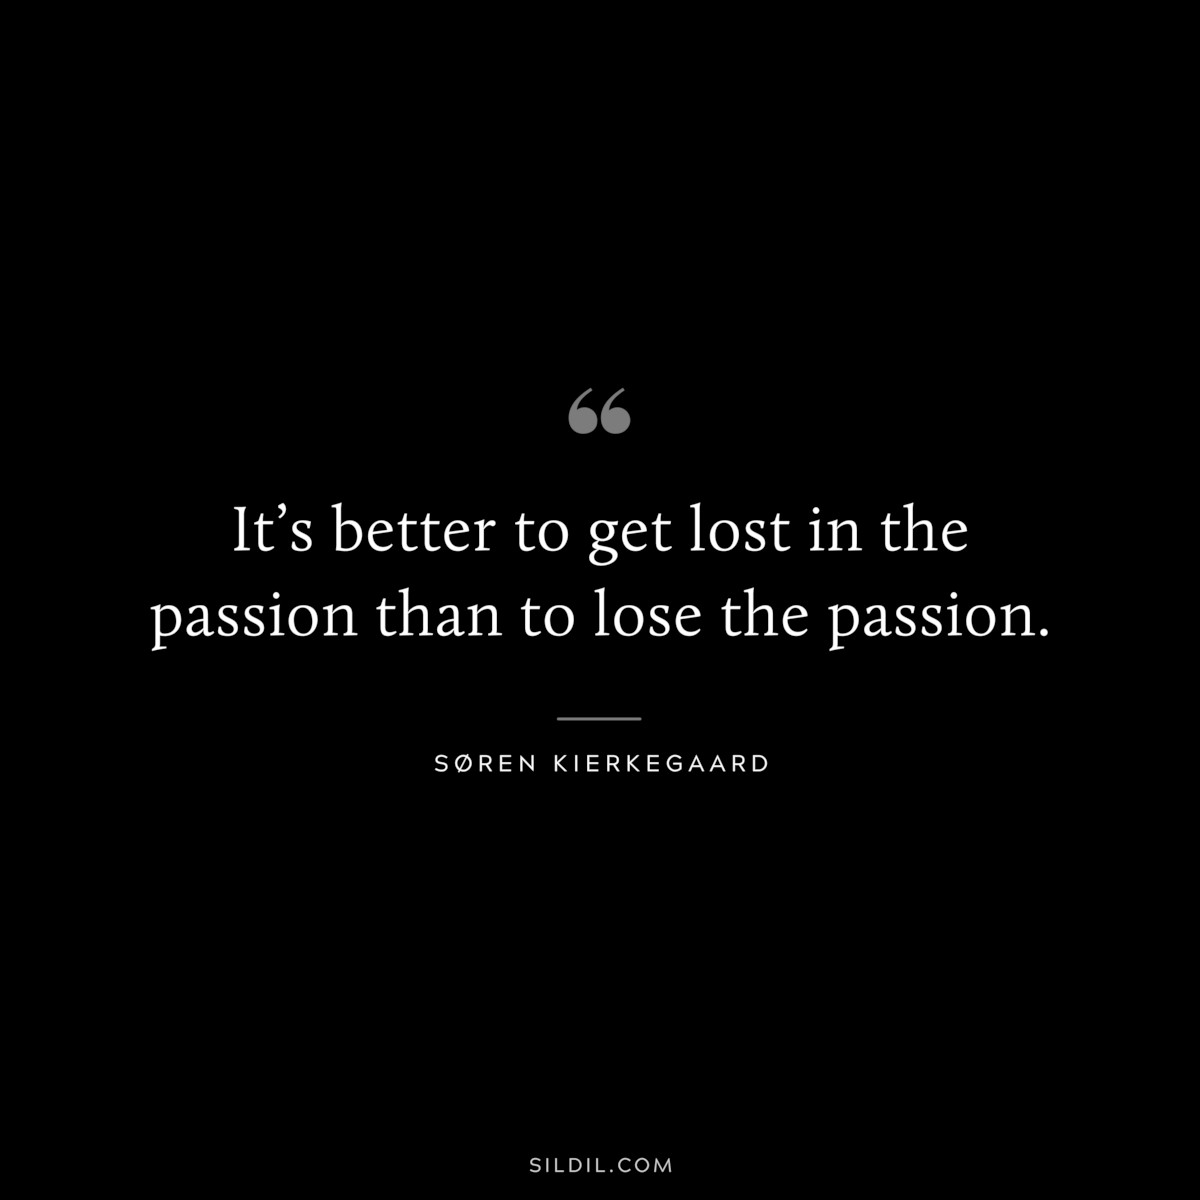 It’s better to get lost in the passion than to lose the passion. ― Søren Kierkegaard